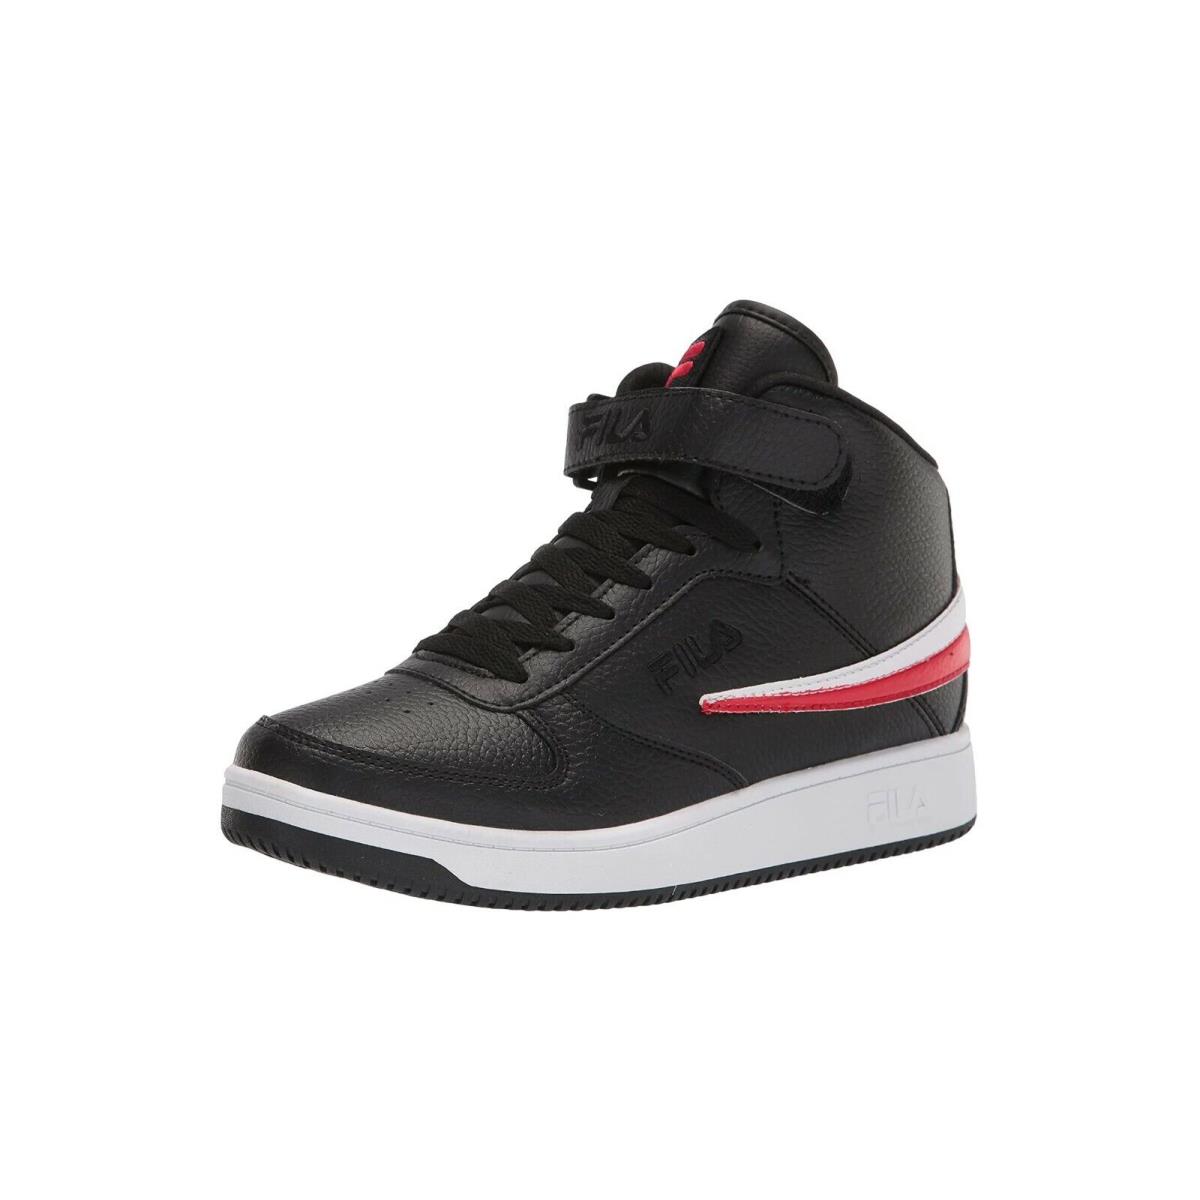 Fila Men Shoes A-high Black White Synthetic Leather Sneakers - Black